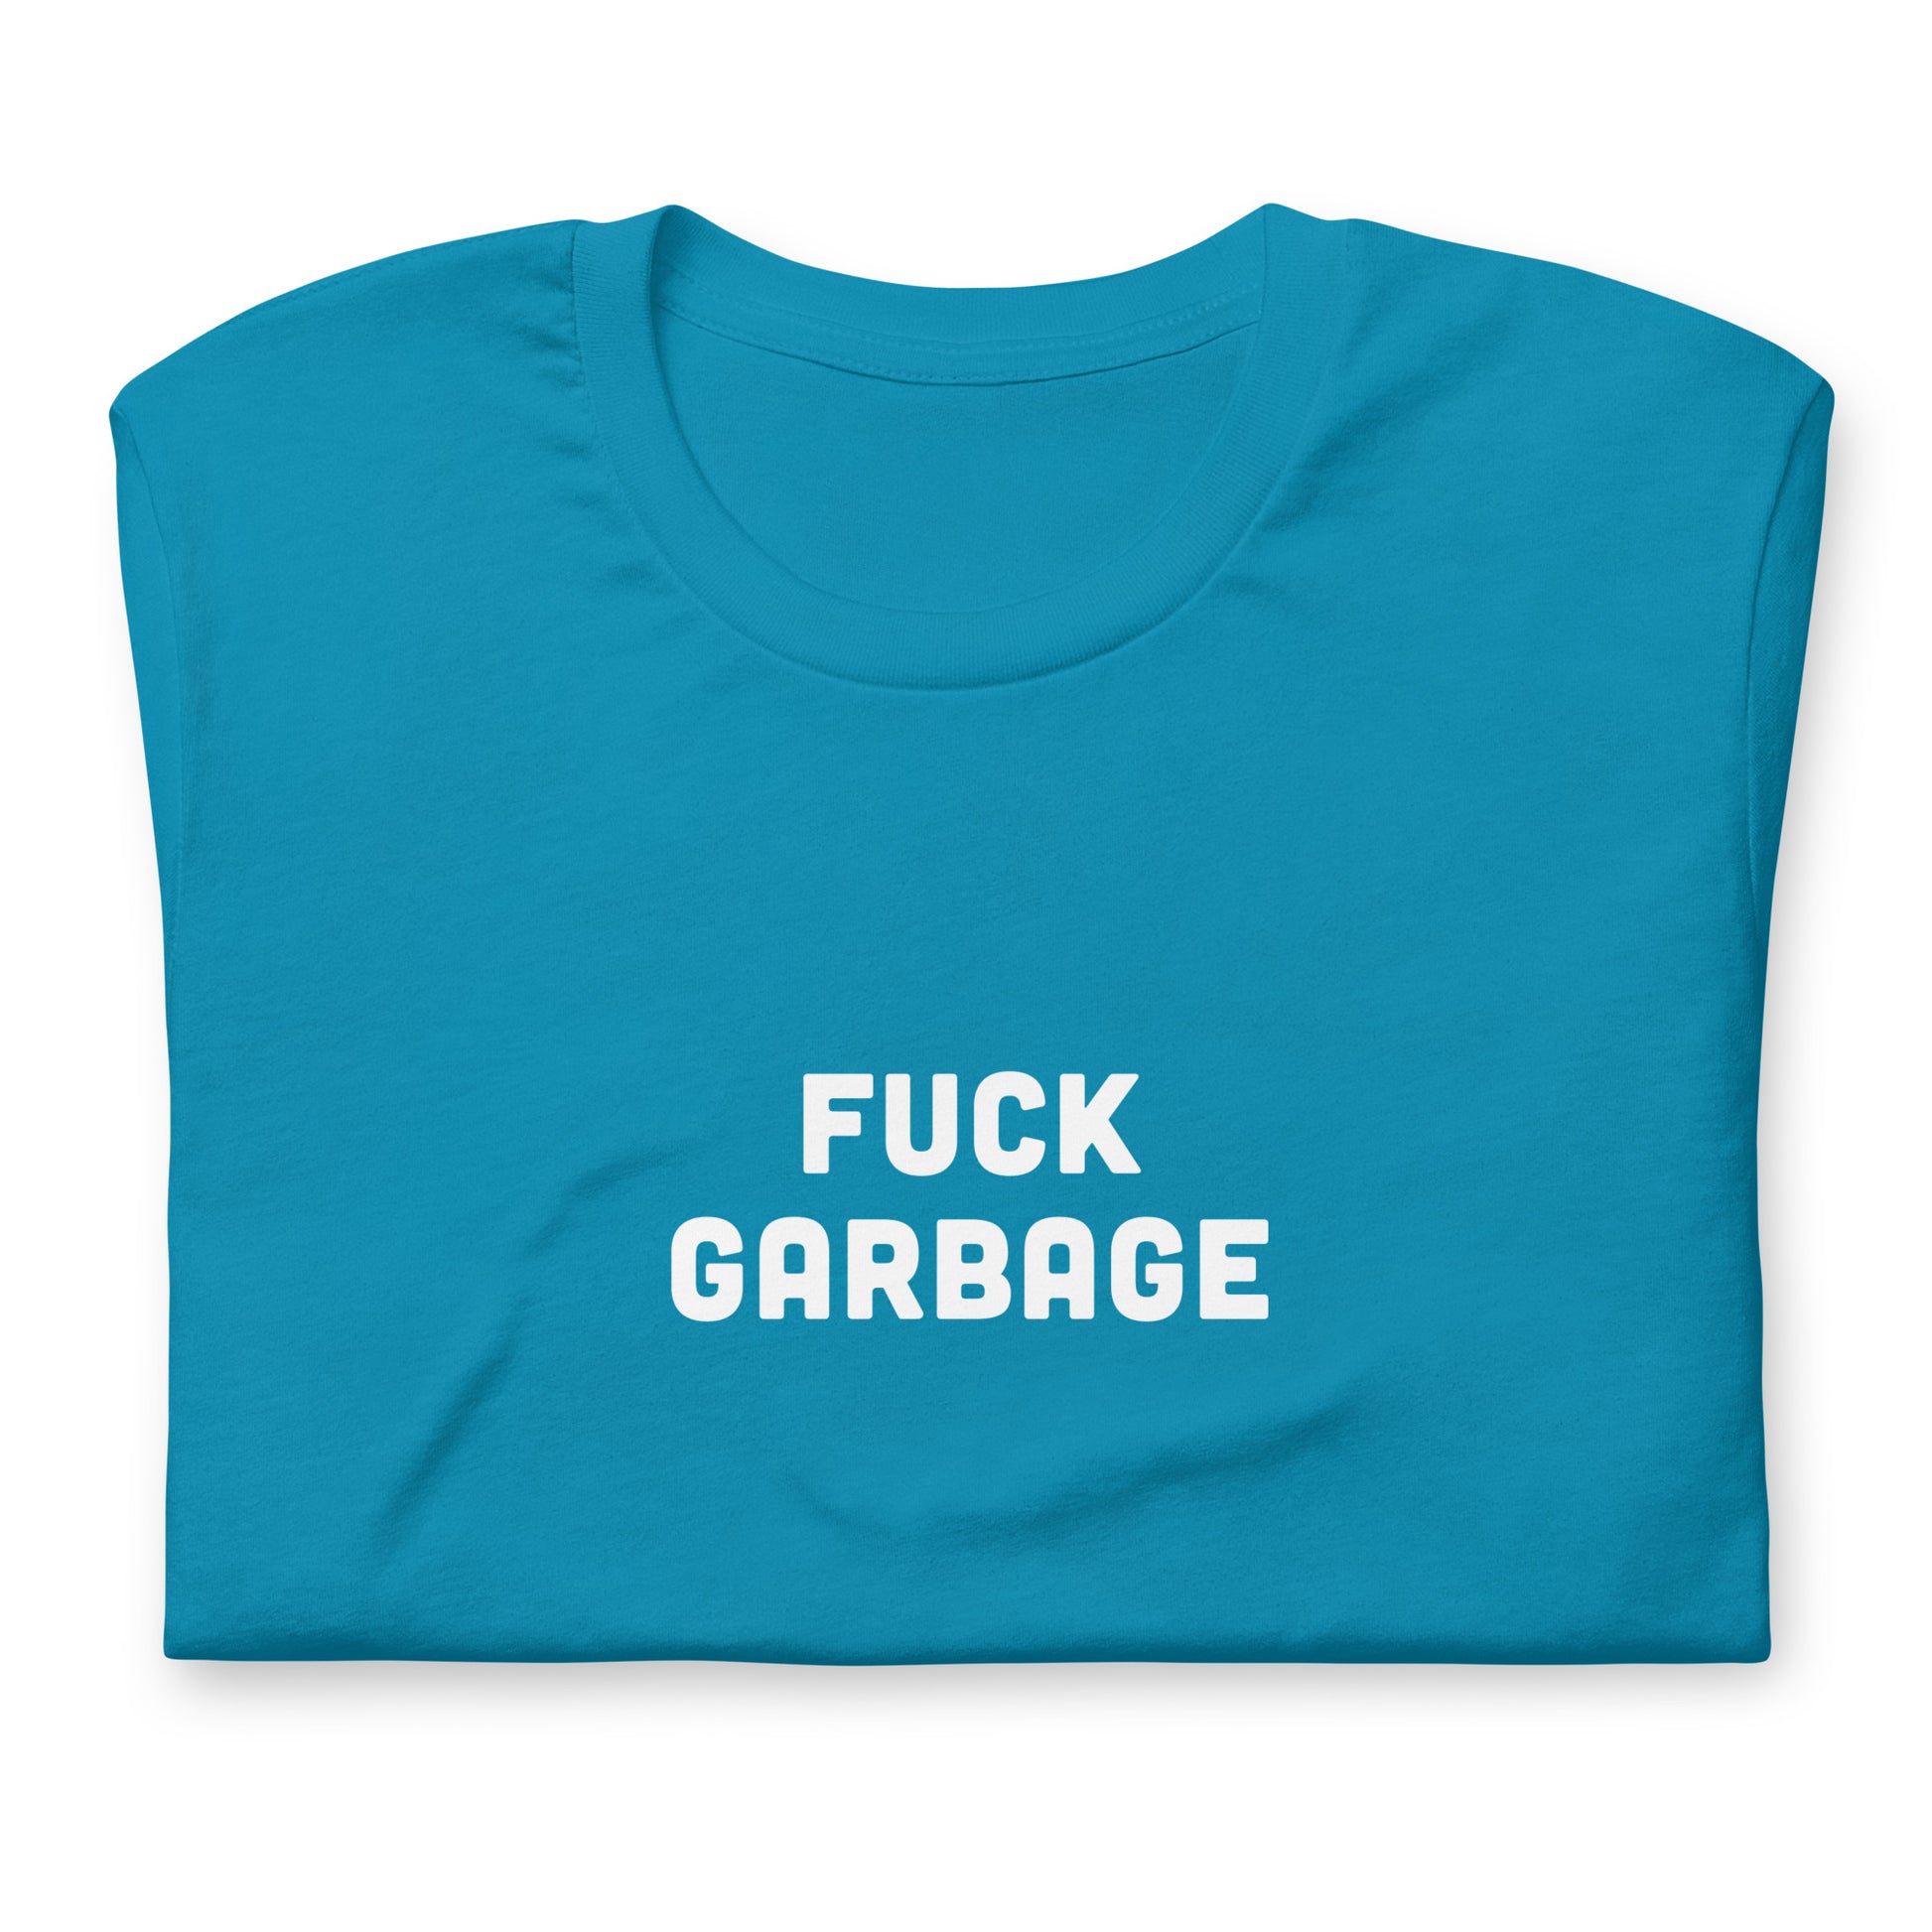 Fuck Garbage T-Shirt Size M Color Navy